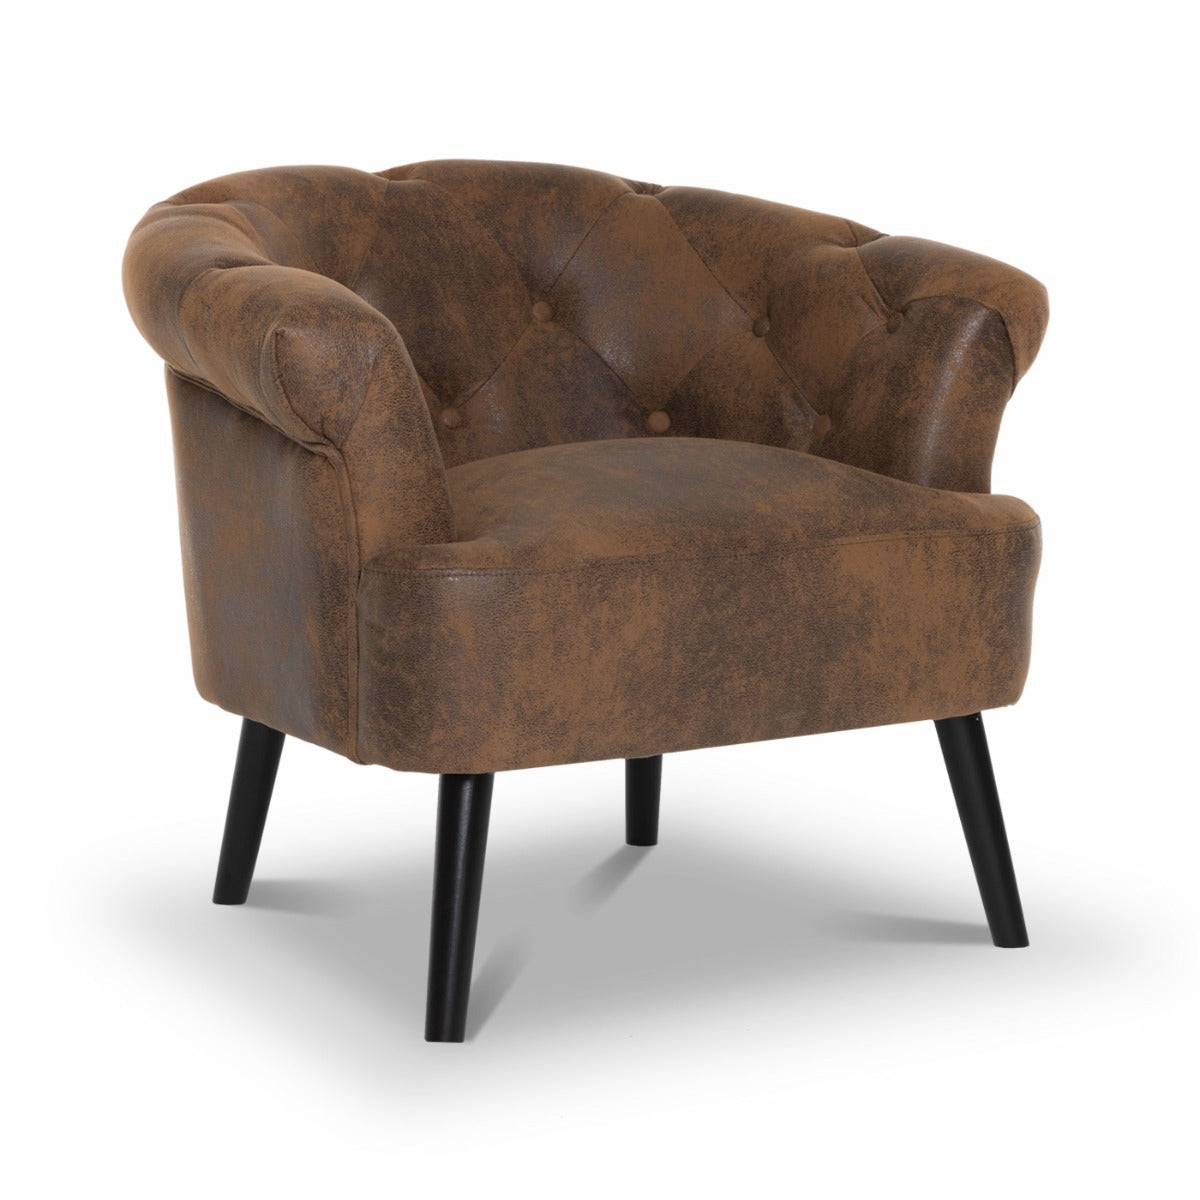 Home › Accent Chairs › Leather Accent Chairs › Brown Leather Accent ...